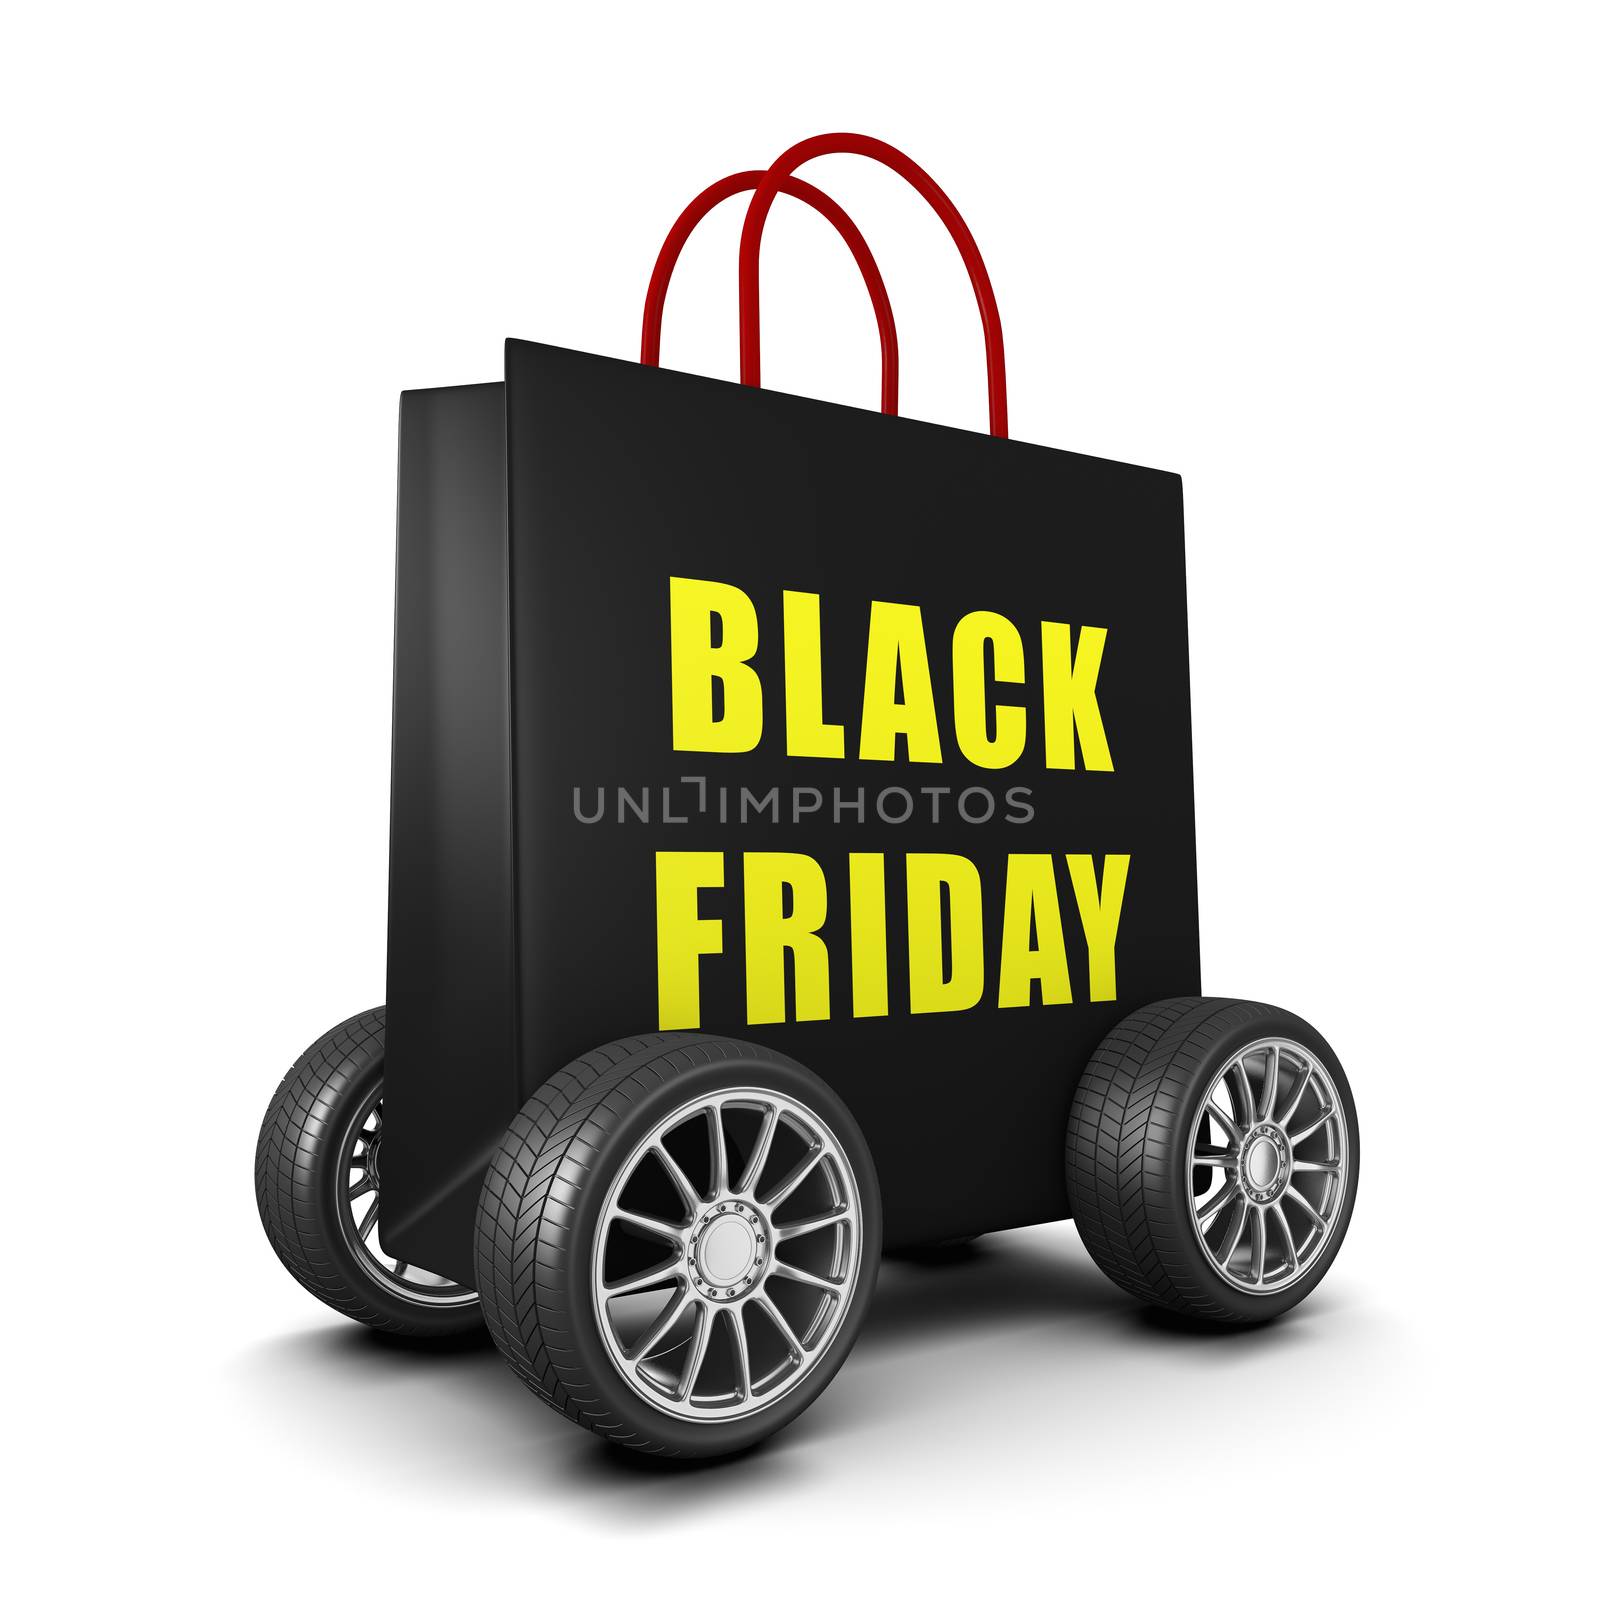 Black Shopping Bag on Wheels with Yellow Black Friday Text on White Background 3D Illustration